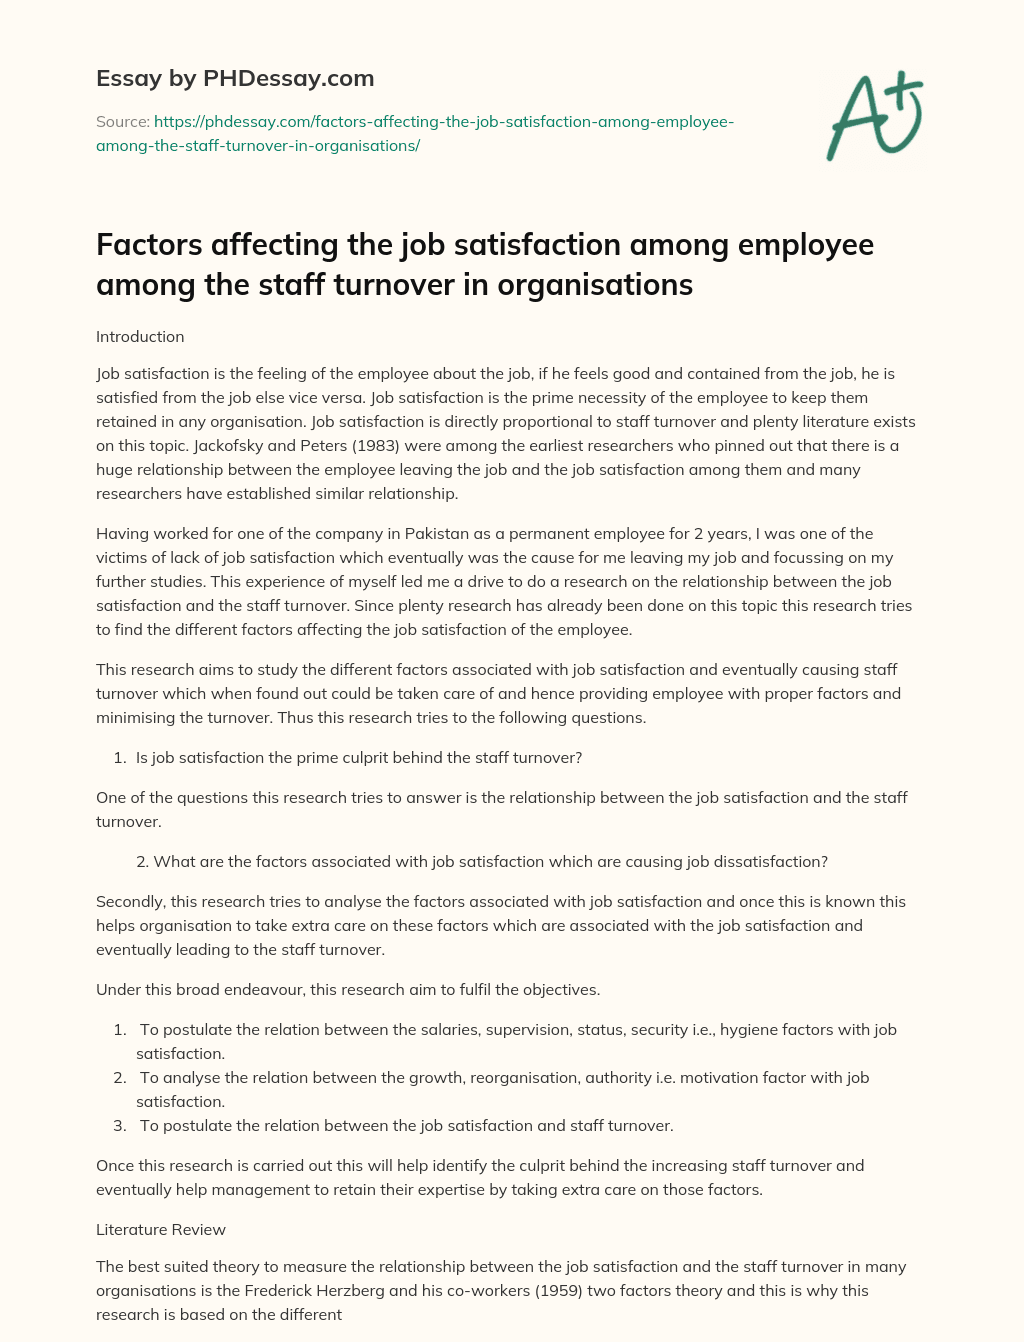 Factors affecting the job satisfaction among employee among the staff turnover in organisations essay